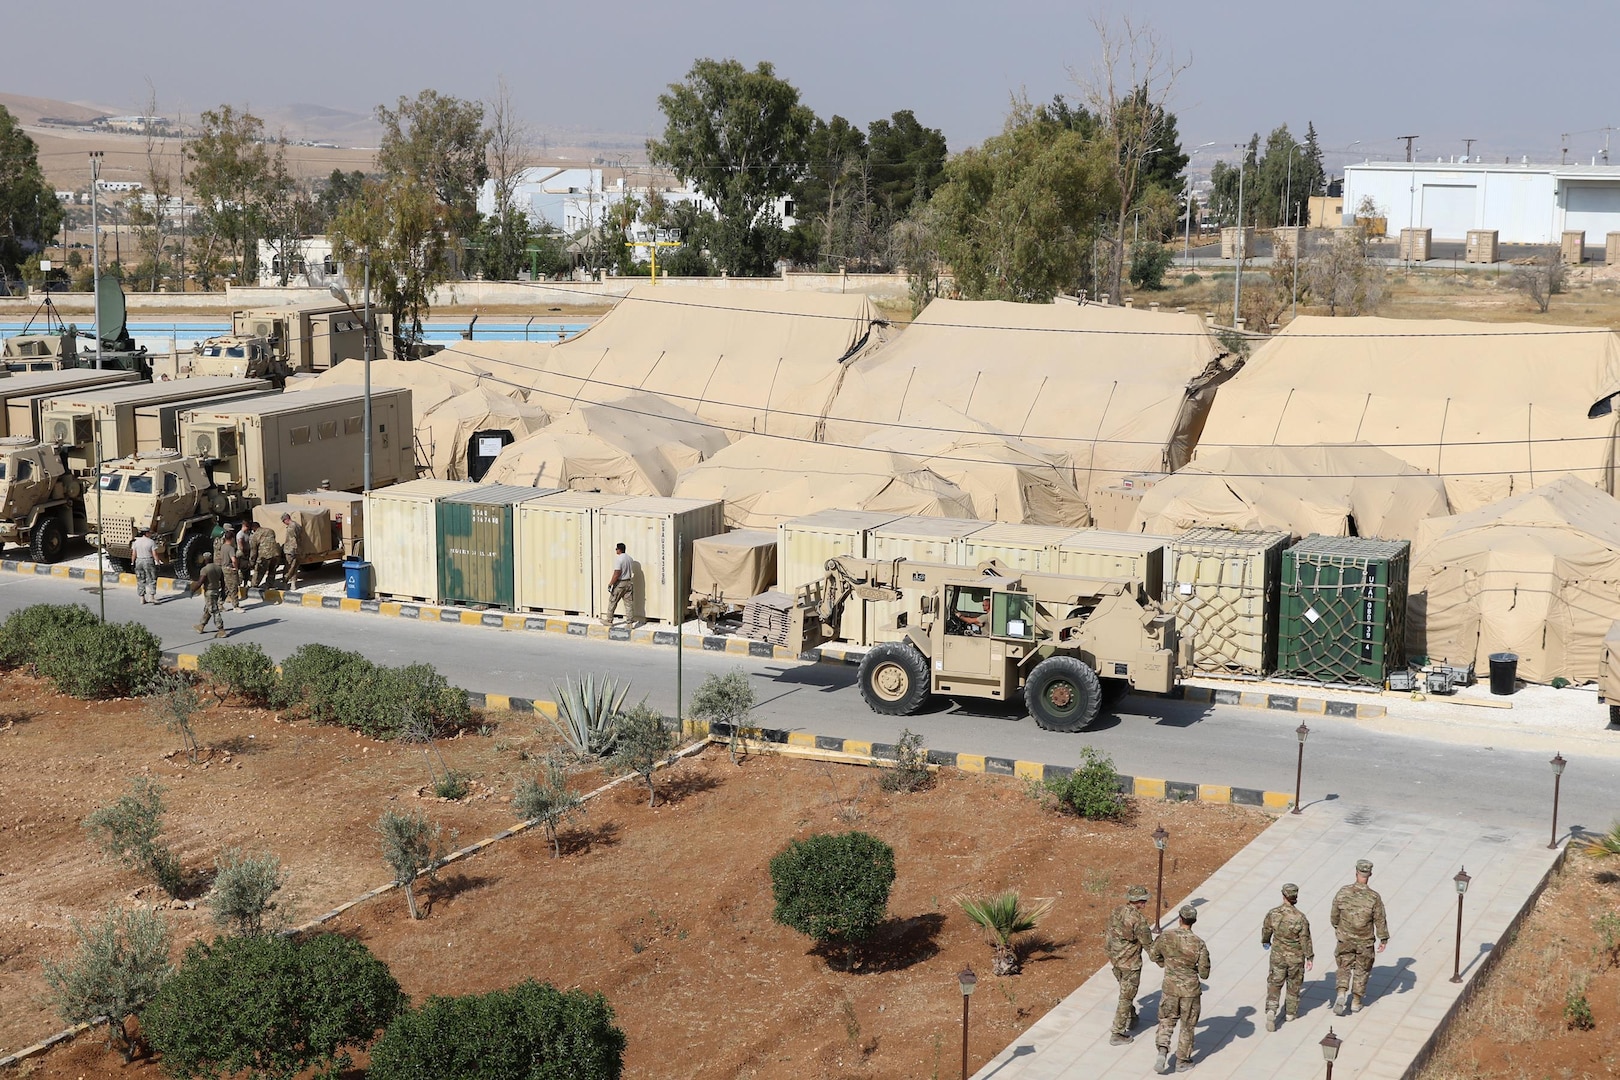 The USARCENT contingent command post tactical operations center for Exercise Eager Lion was built to standard in less than 60 hours at the Joint Training Center in Jordan.